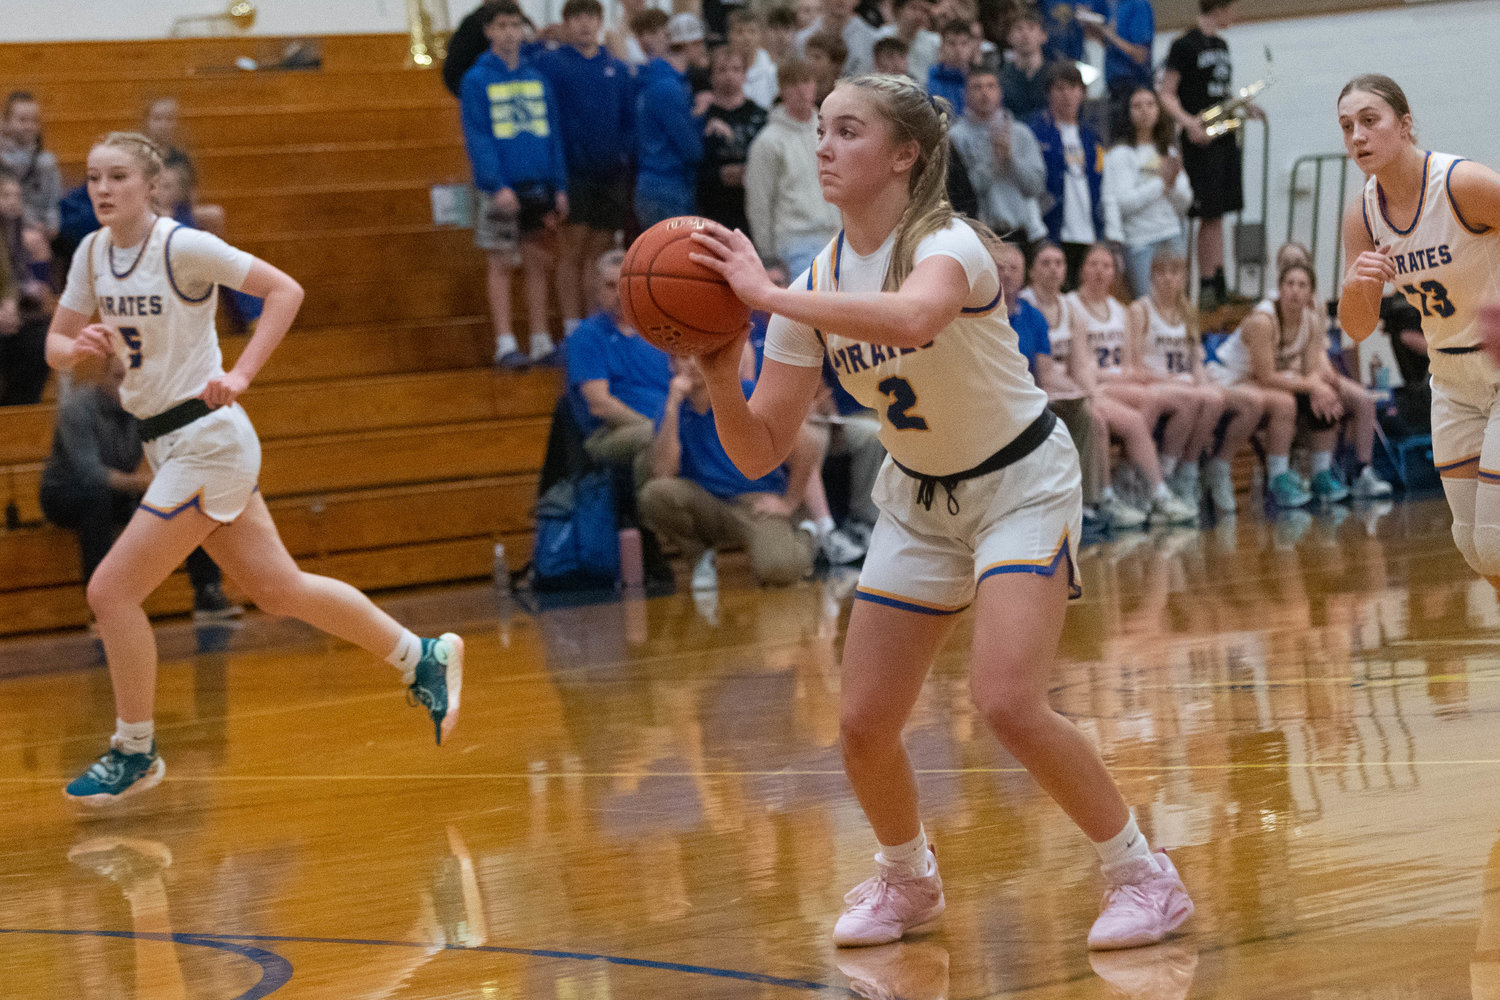 Danika Hallom winds up from beyond the arc in the first half of Adna's district matchup against Raymond at Rochester on Feb. 7.